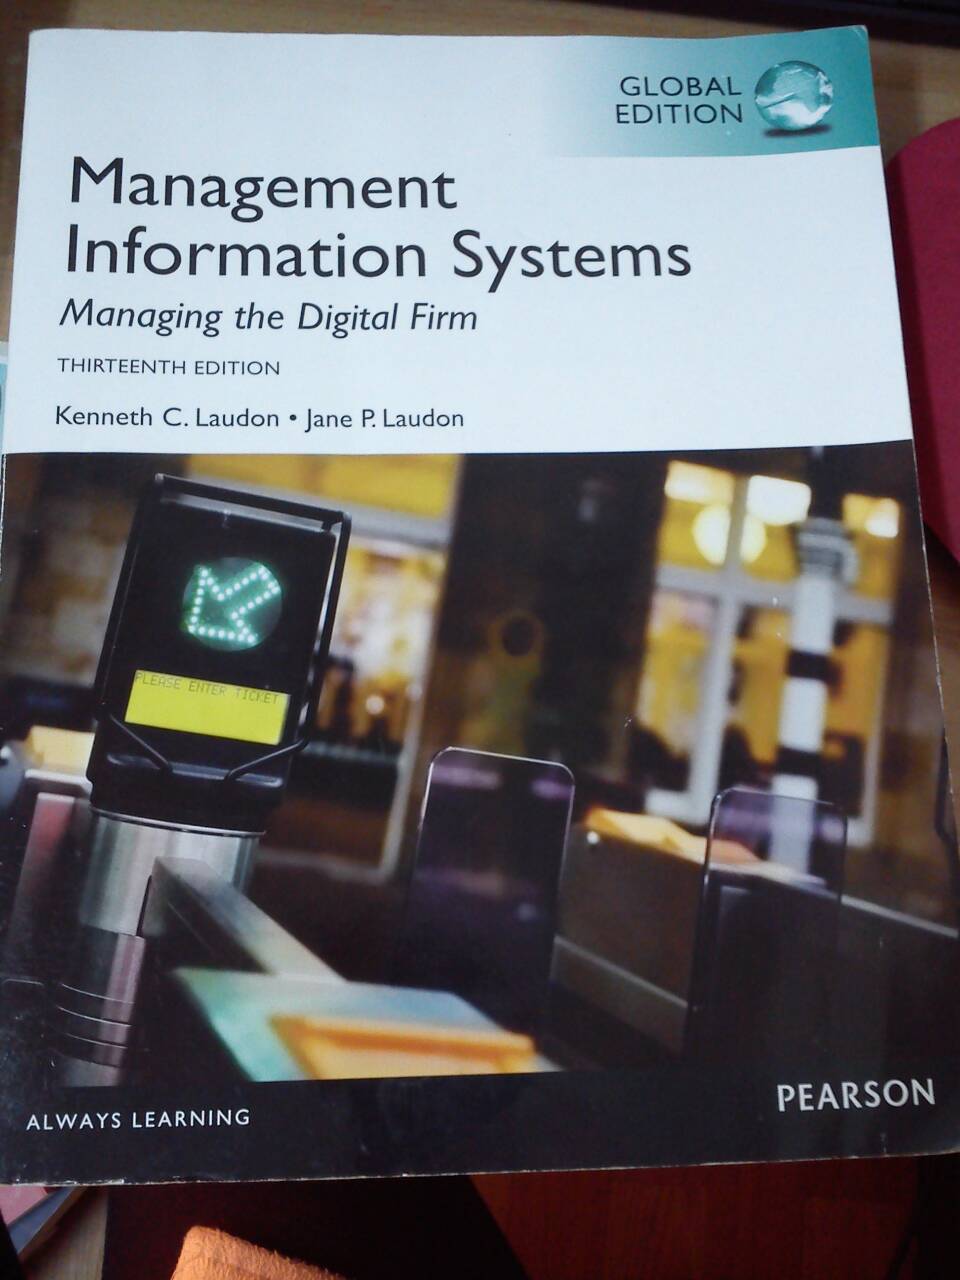 Management Information Systems： Managing the Digital Firm, 13/e 詳細資料